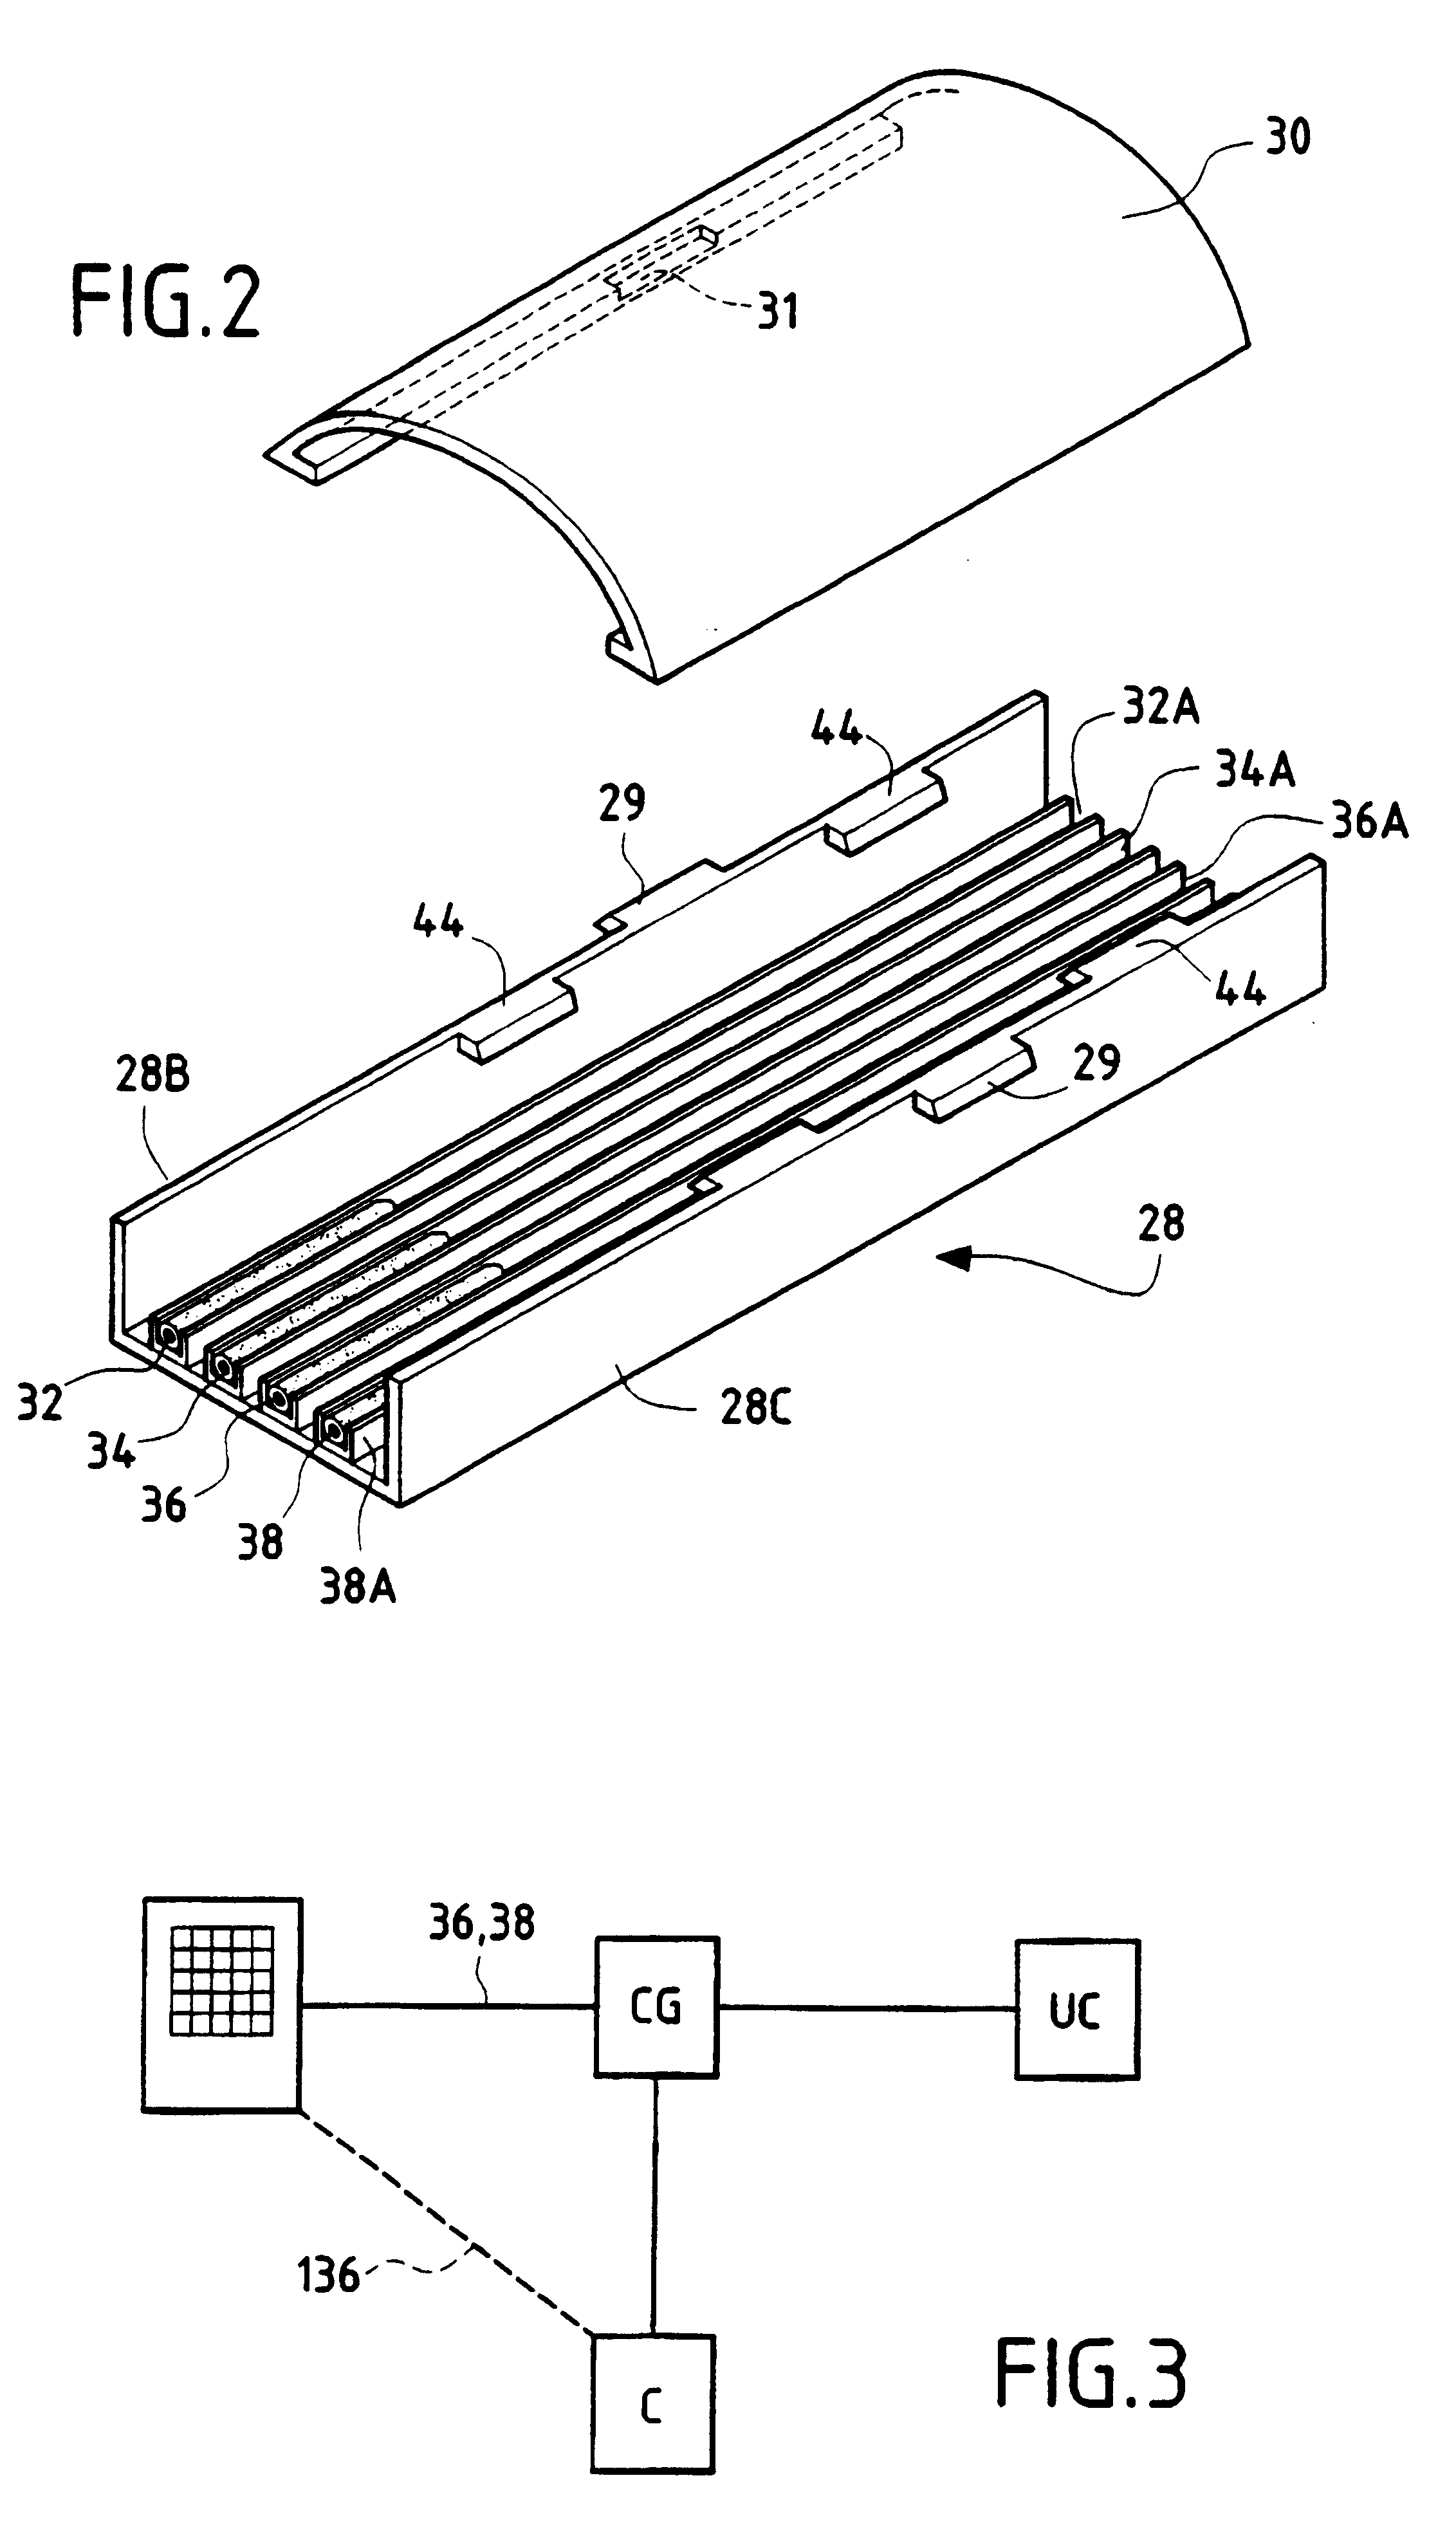 Apparatus for controlling the opening of a door